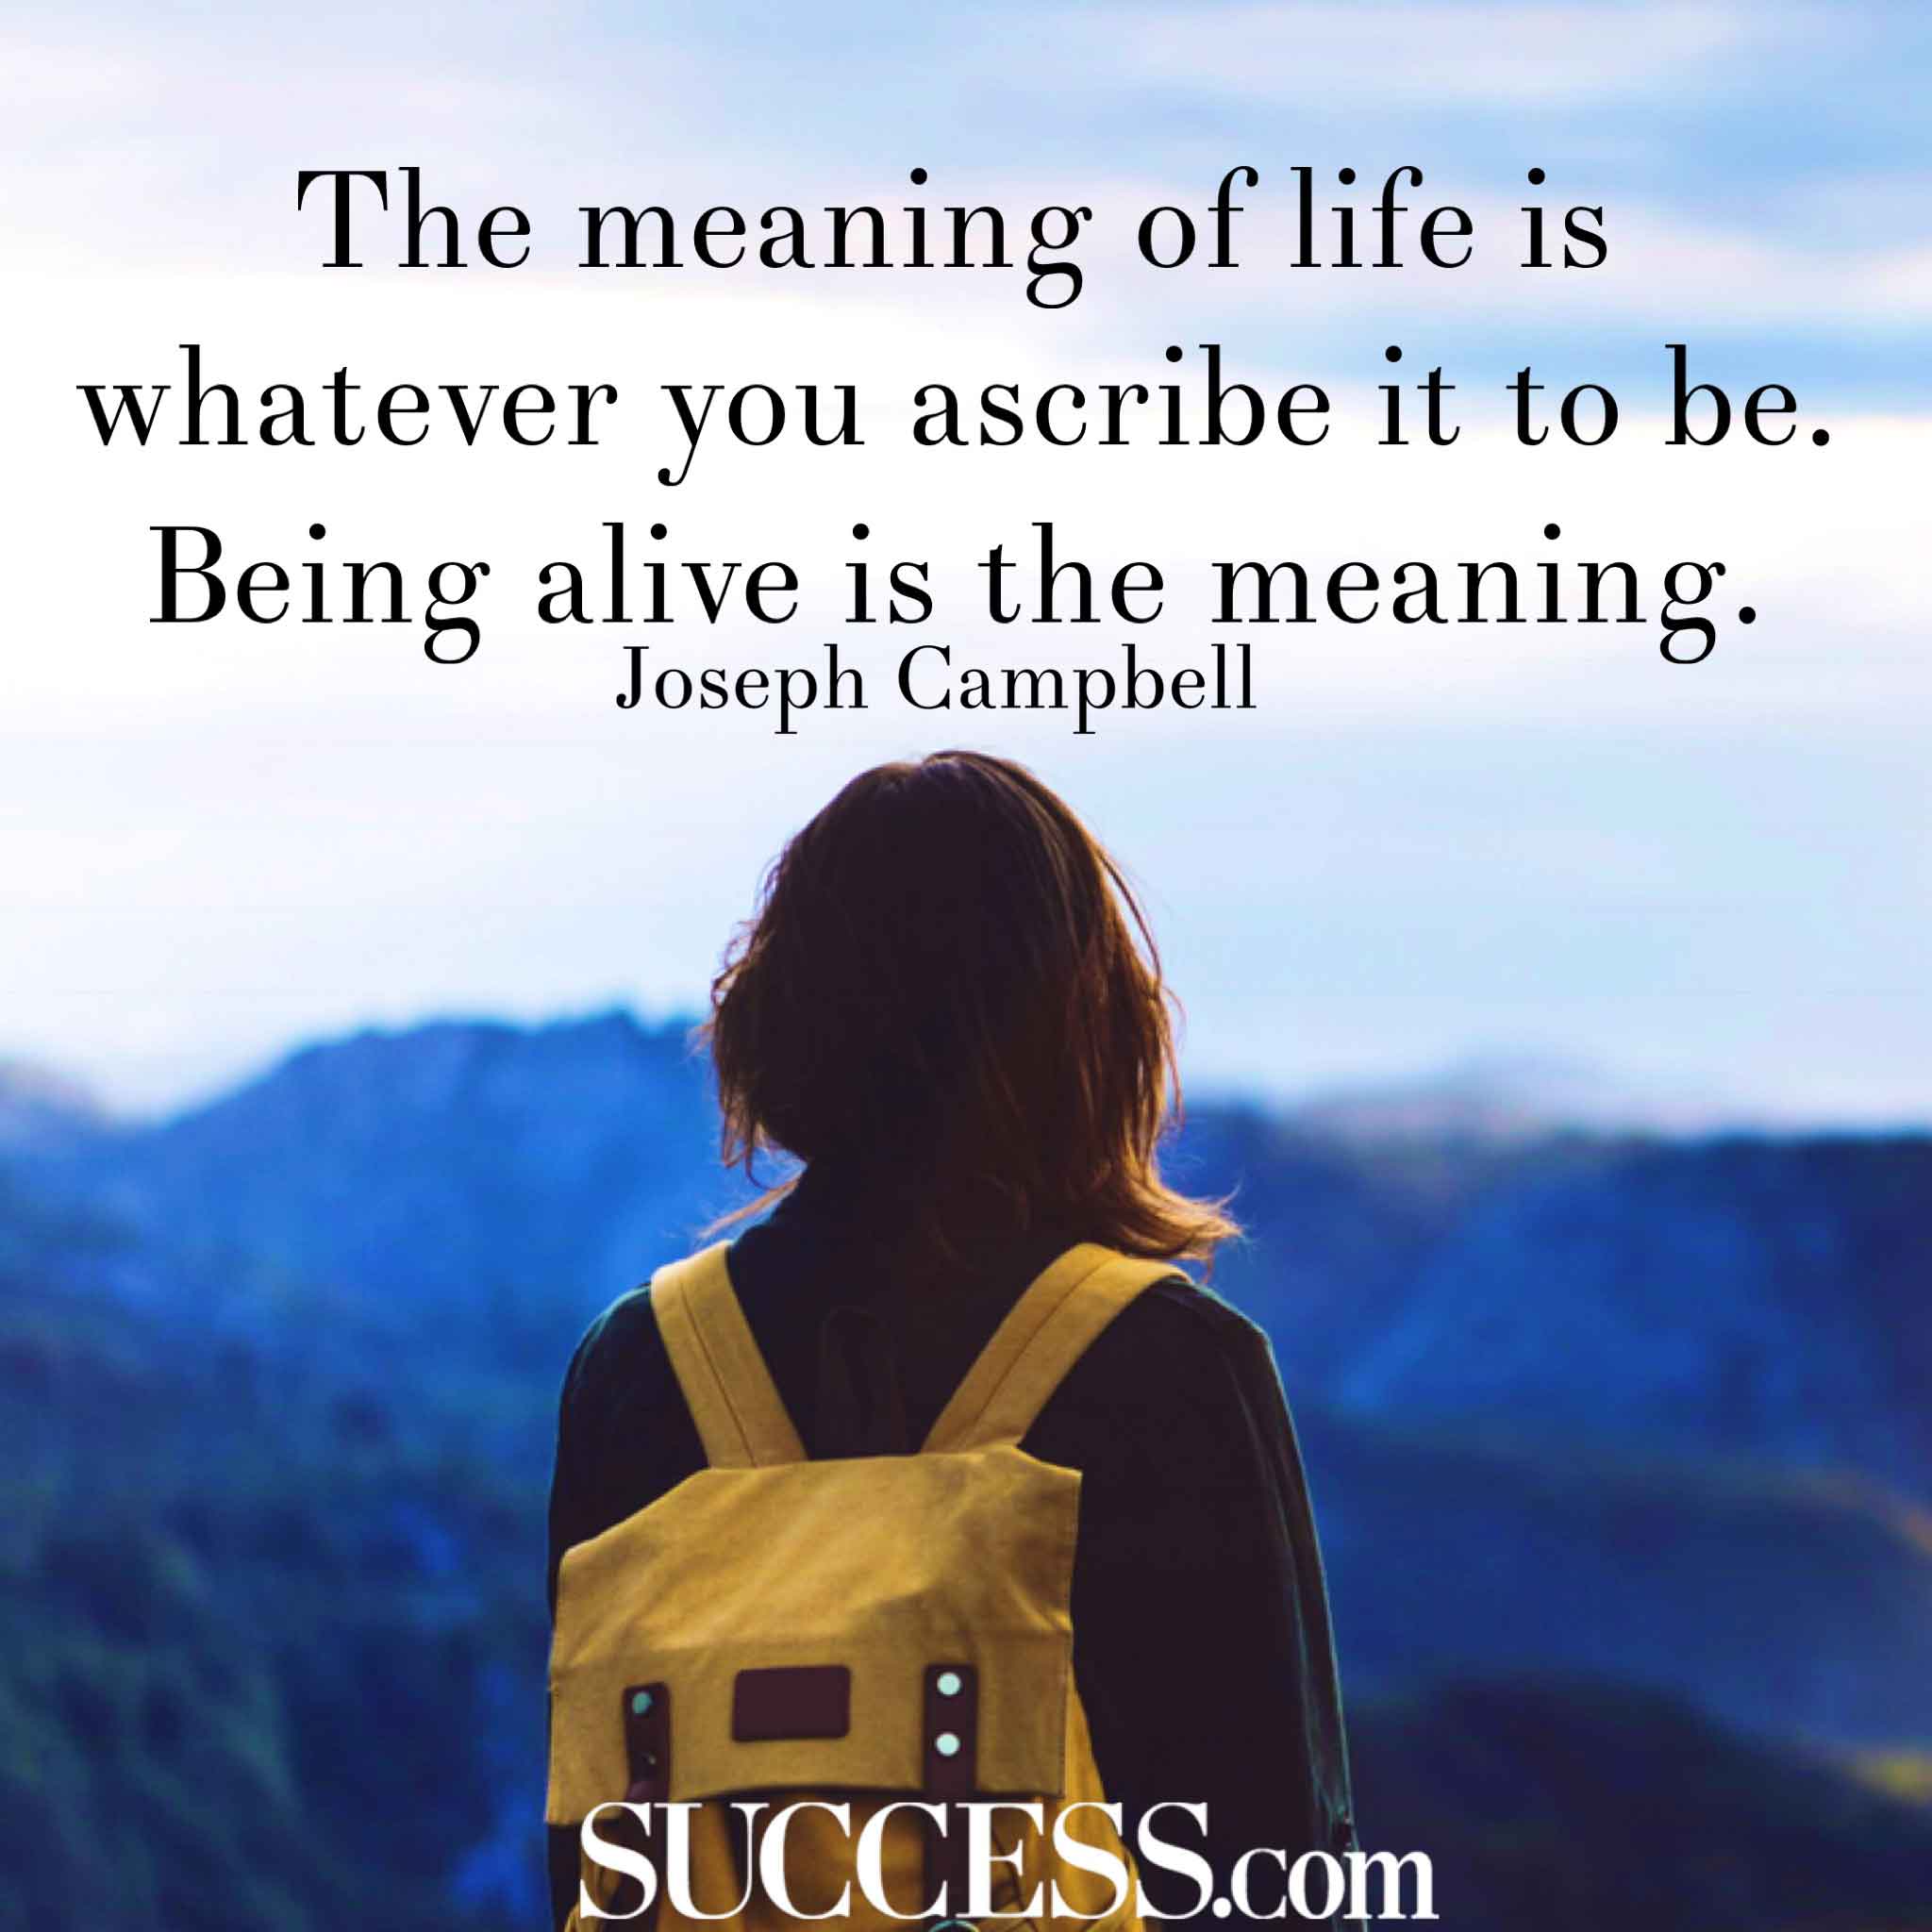 The Meaning of Life in 15 Wise Quotes